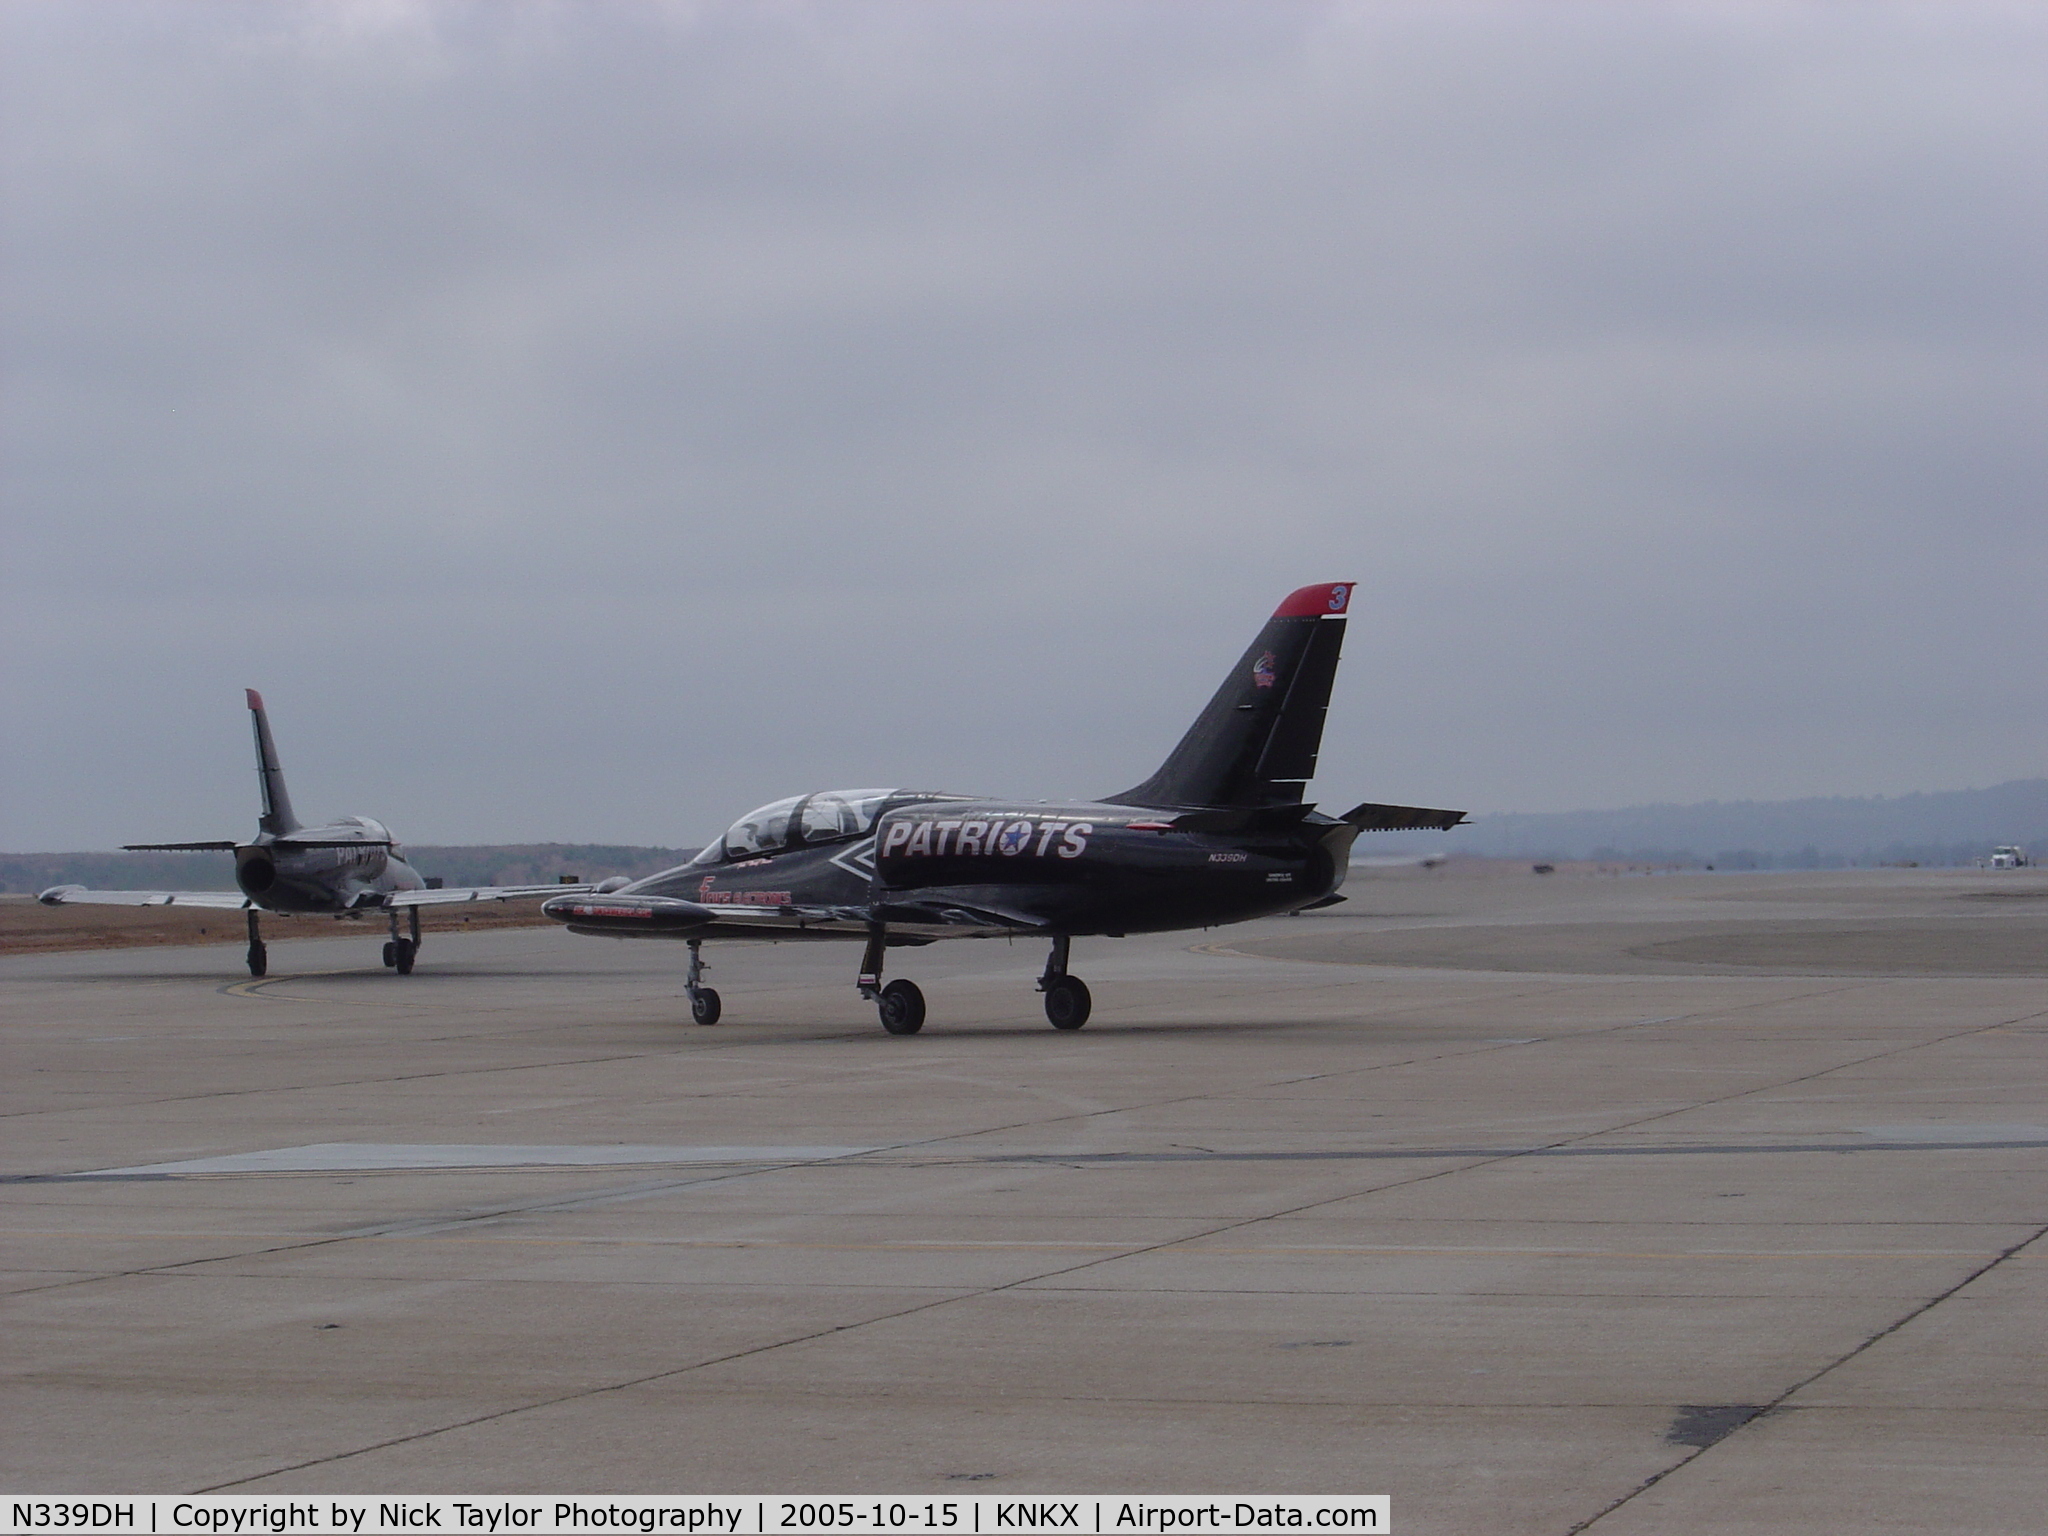 N339DH, 1983 Aero L-39C Albatros C/N 332622, #3 heads out with another Patriot at the 05 MCAS Miramar Airshow